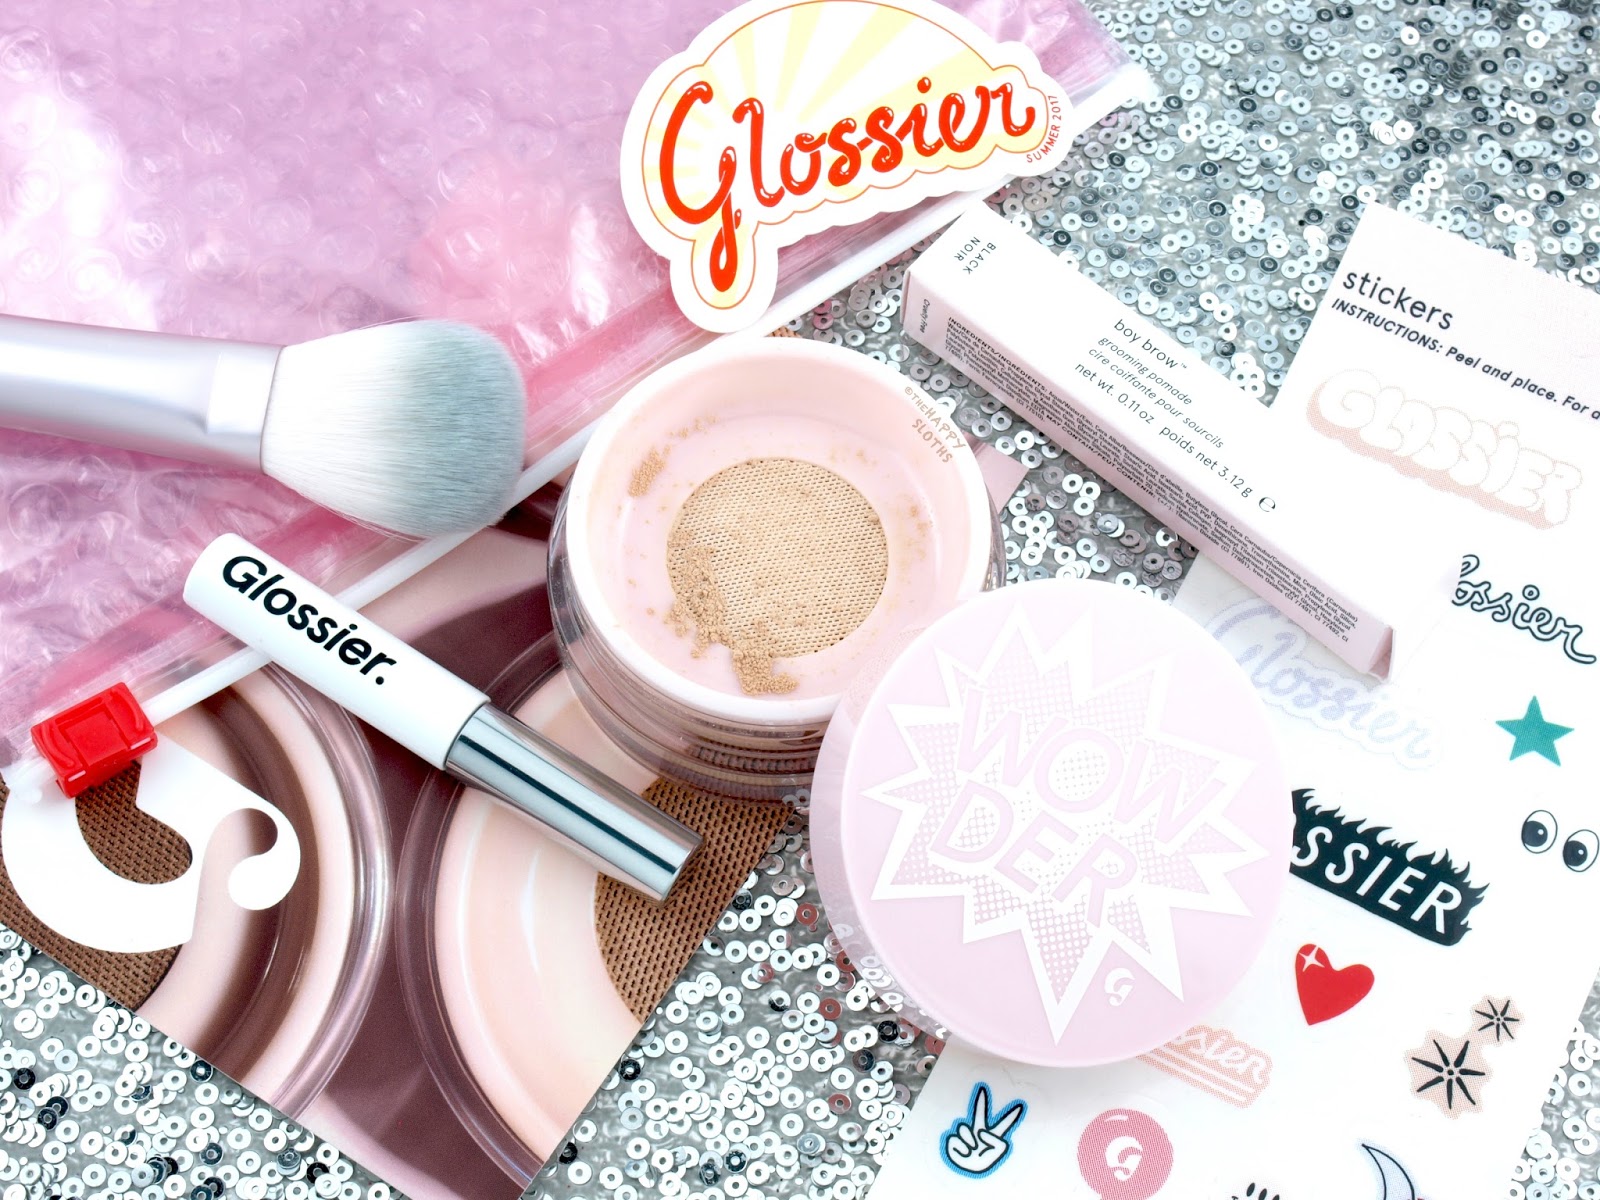 Glossier Wowder & Boy Brow: Review and Swatches